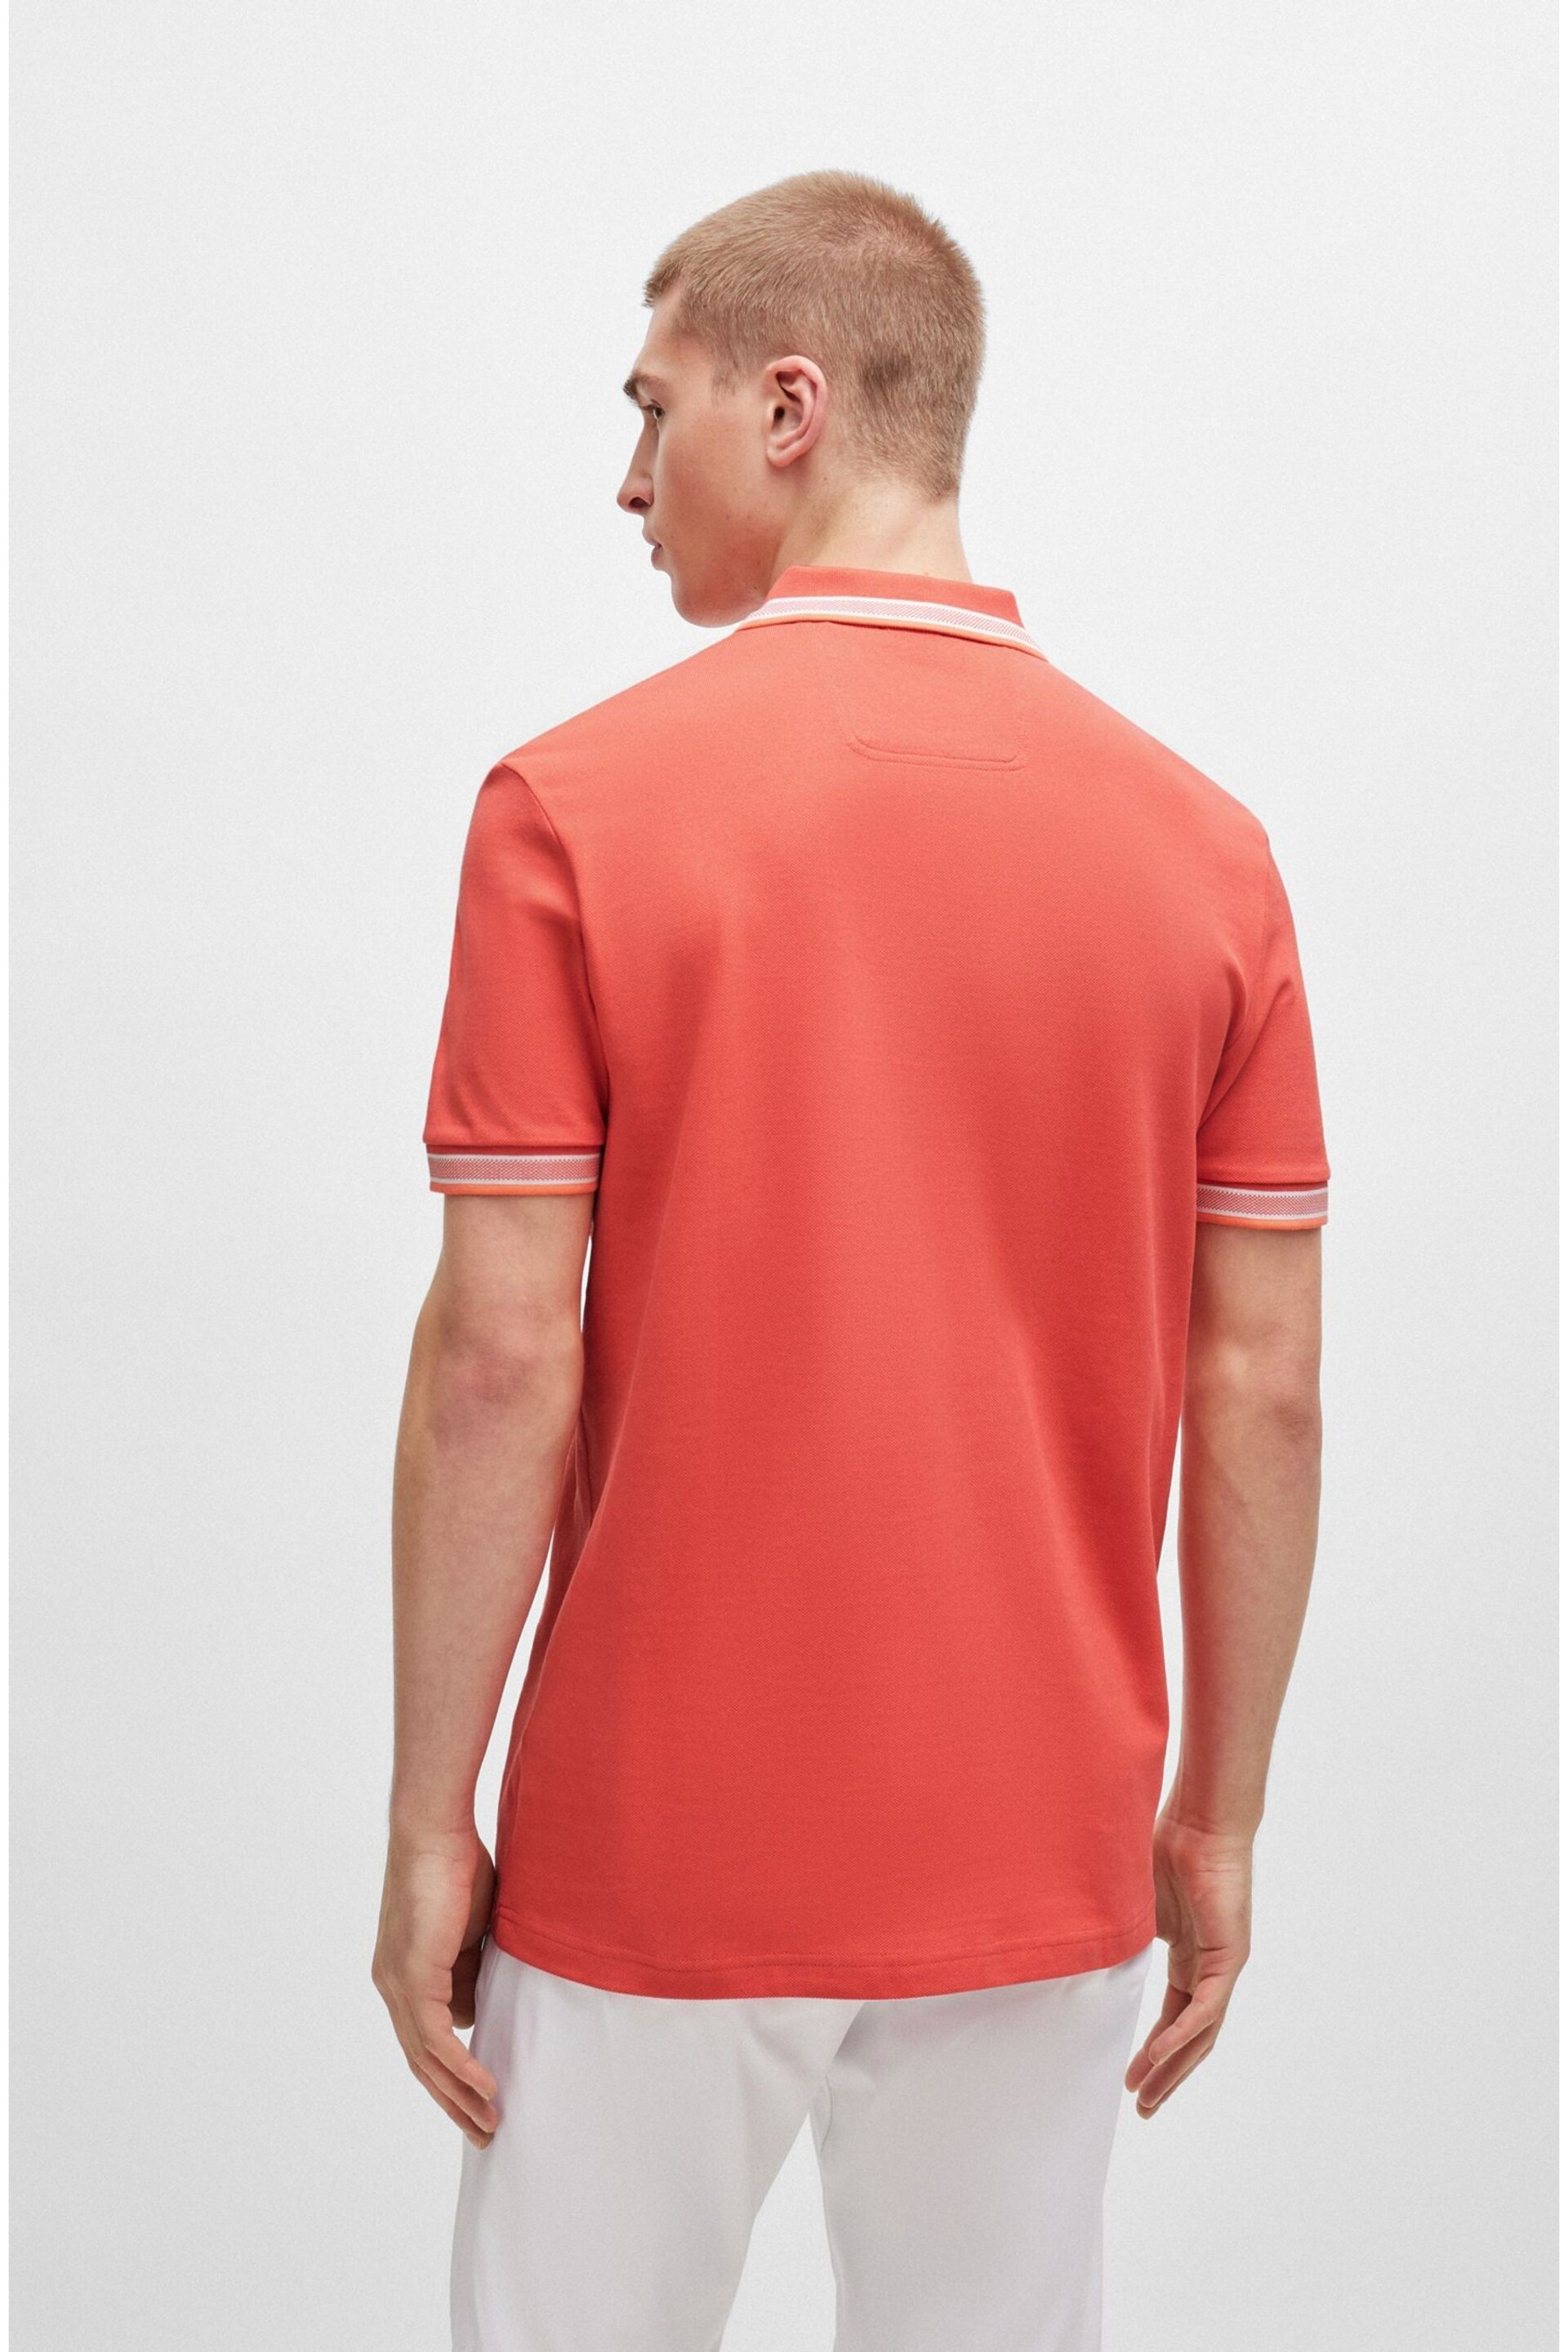 BOSS Dark Orange Cotton Polo Shirt With Contrast Logo Details - Image 3 of 5